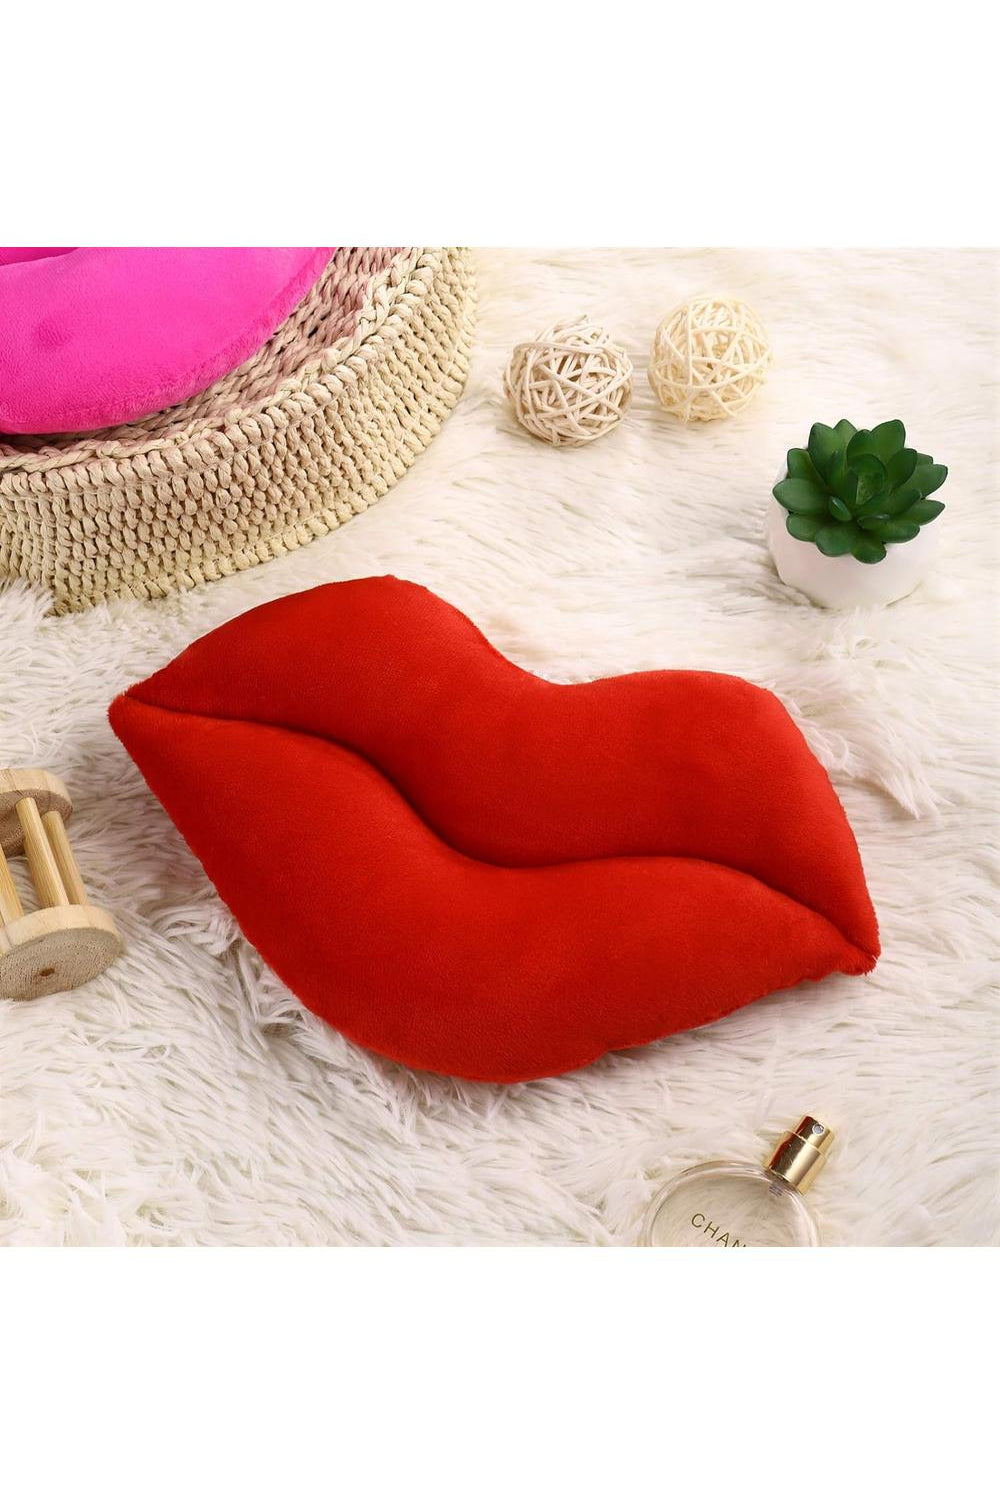 Shop For 13" Plush Red Lips 63034RD